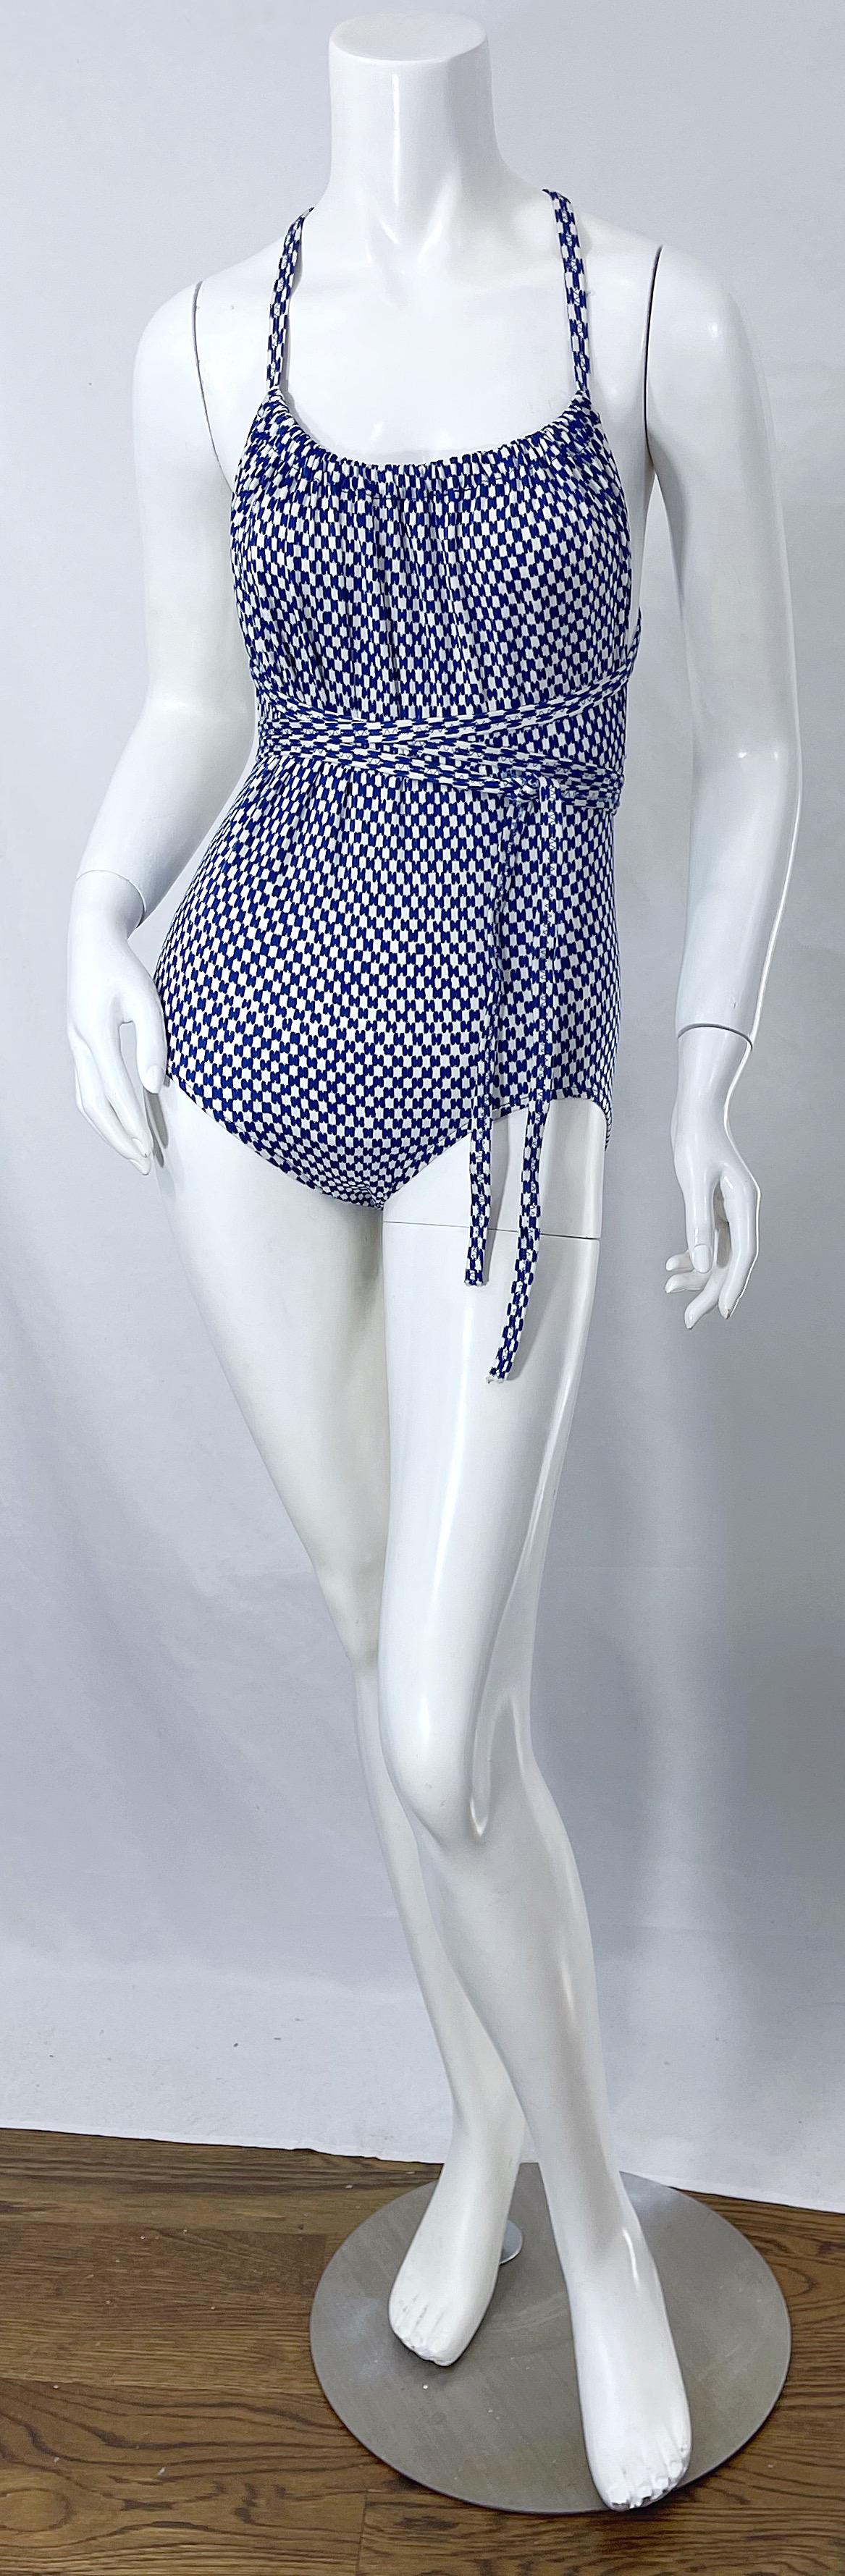 Rare and collectible HALSON 1970s blue and white logo print one piece swimsuit ! Features the signature H logo print throughout. I recently acquired five Halston swimsuits from a former Halstonette model. This is one of them. Halter style wraps